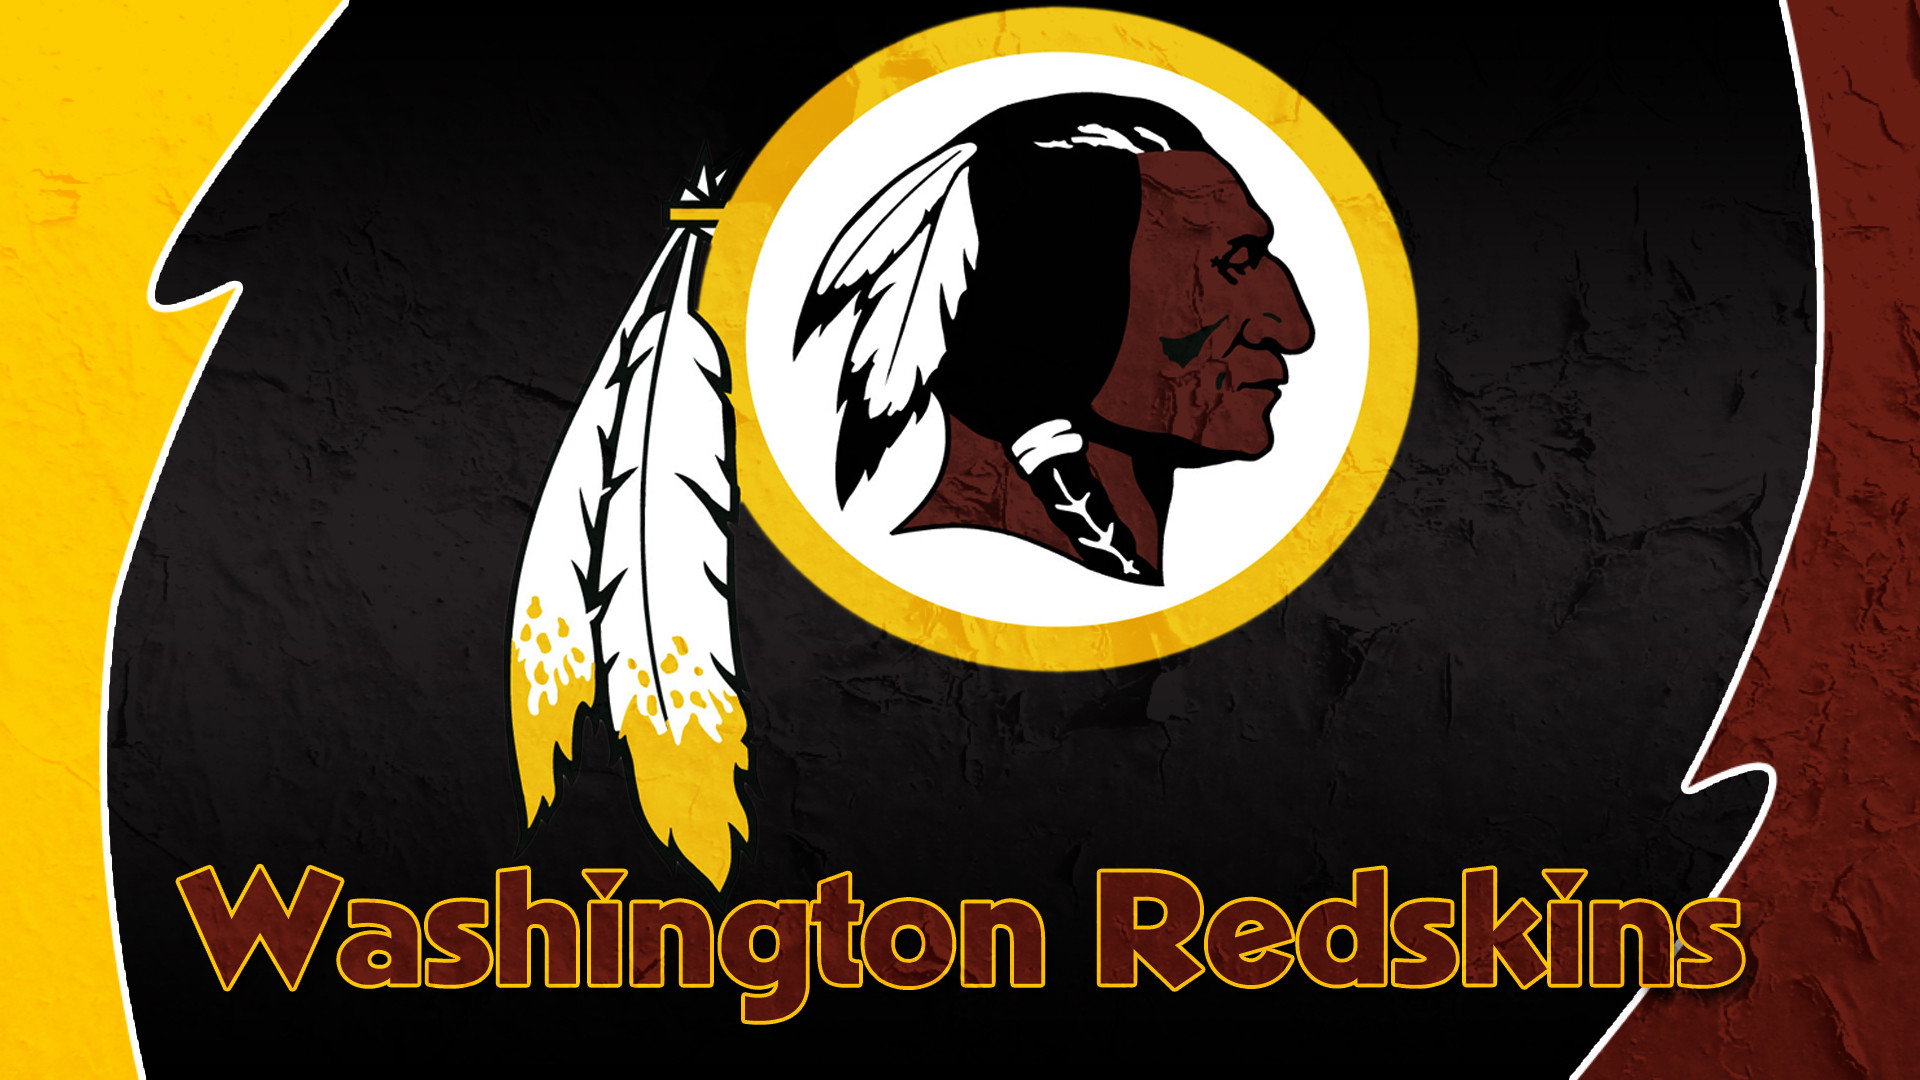 1920x1080 Amazing Redskins Wallpapers Collection BsnSCB Gallery | Wallpapers 4k |  Pinterest | Wallpaper